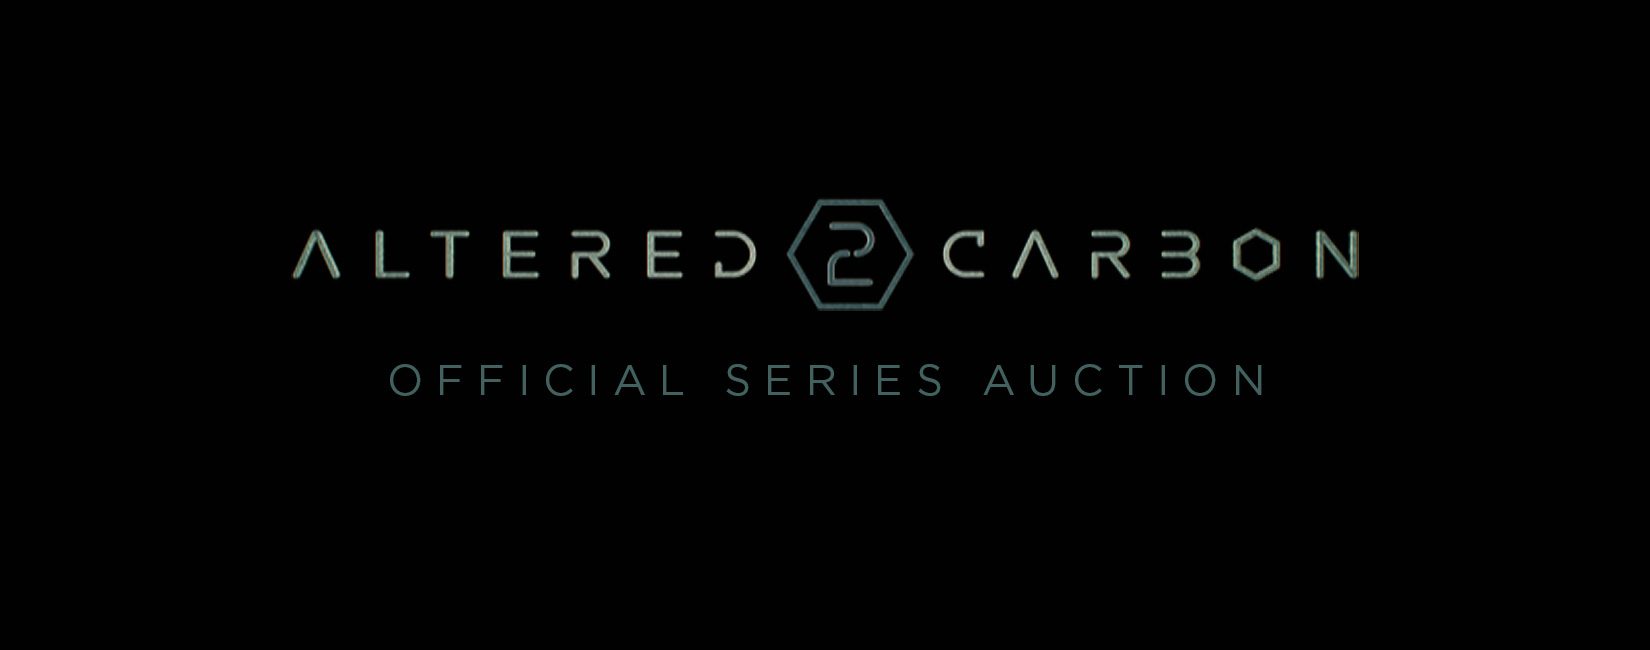 Altered Carbon Auction